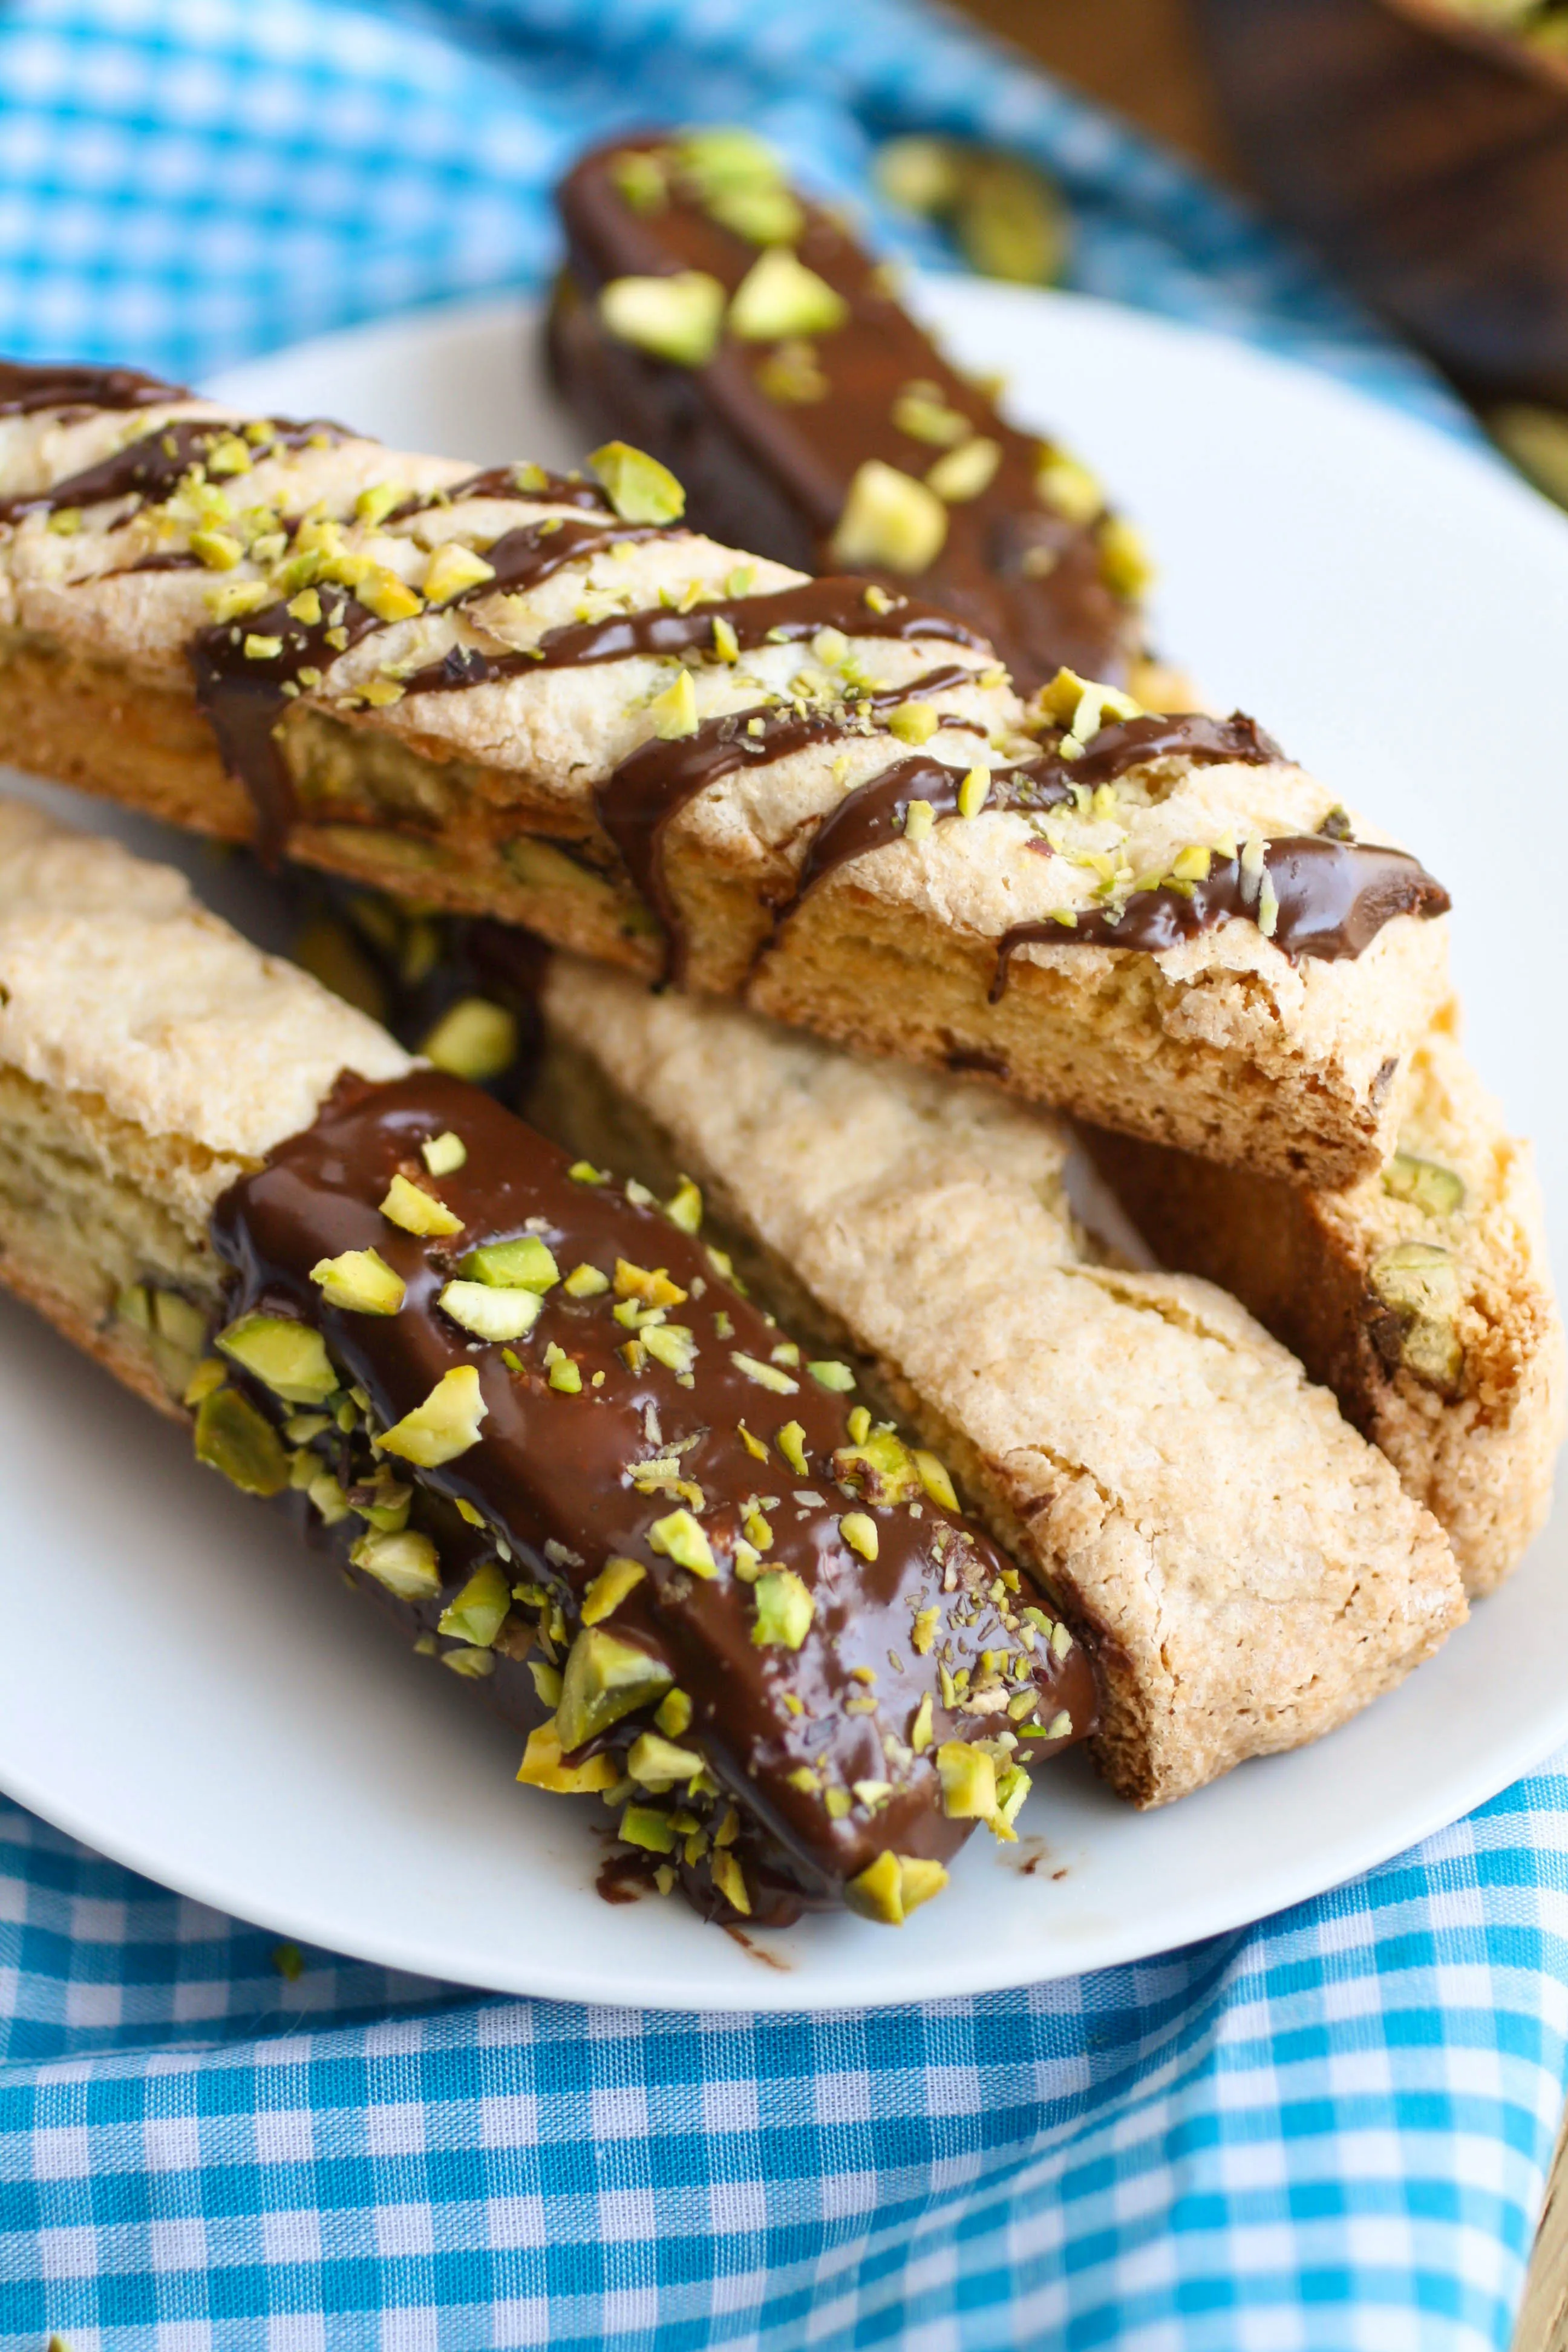 Chocolate-Espresso Dipped Orange and Pistachio Biscotti is an Italian-style cookie that is delicious served with coffee or milk! You'll love the flavors!